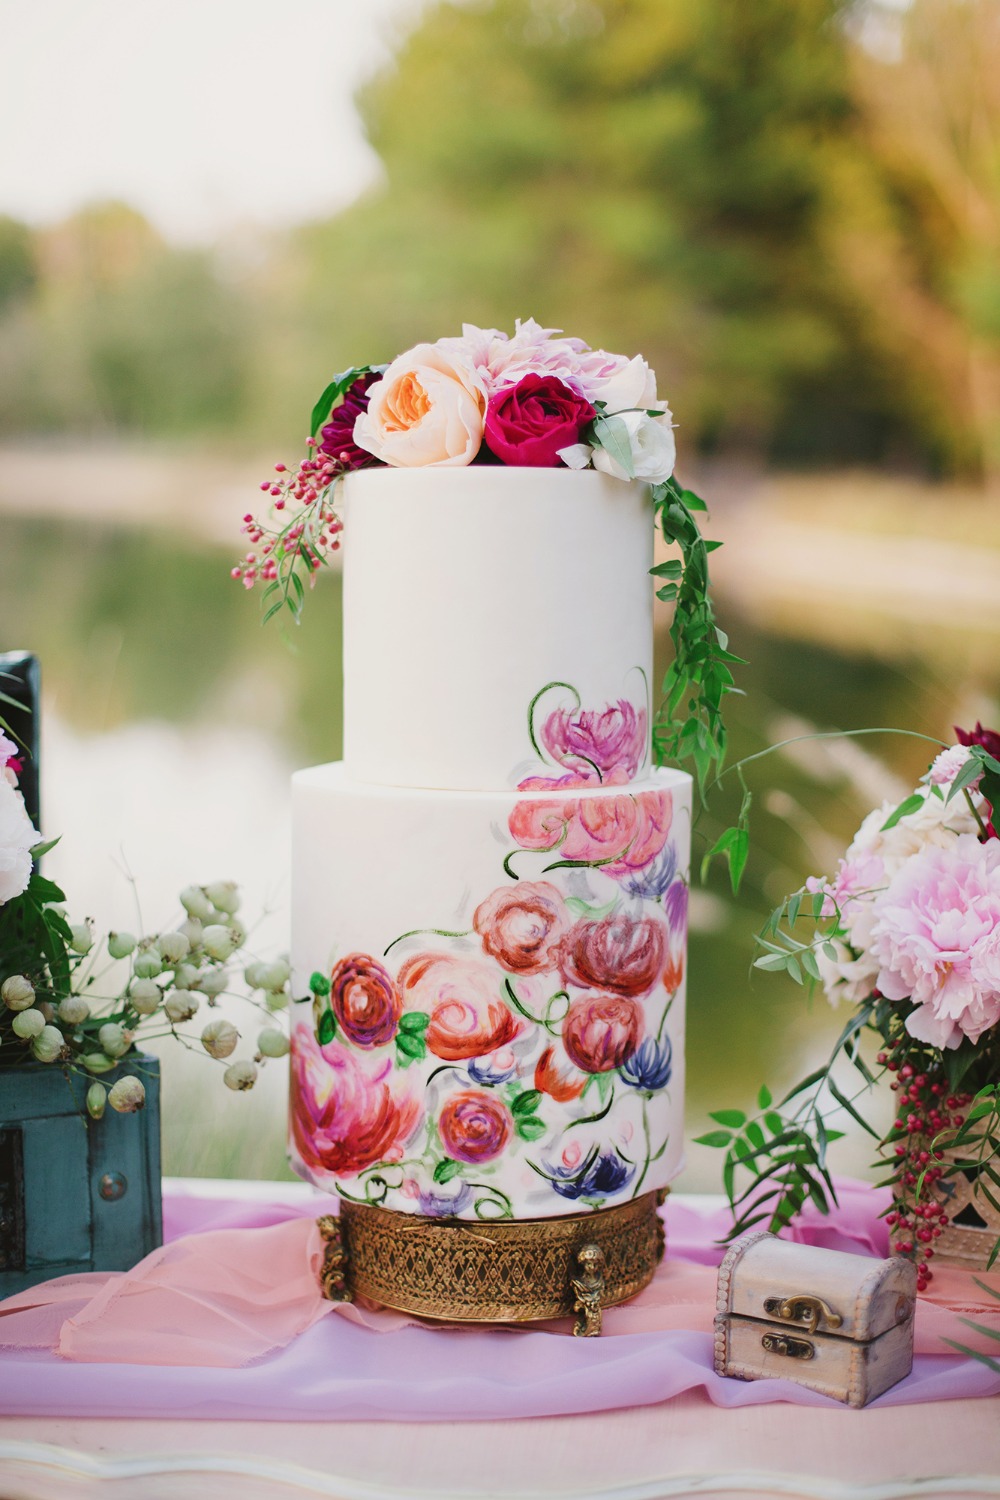 Gorgeous hand painted floral cake